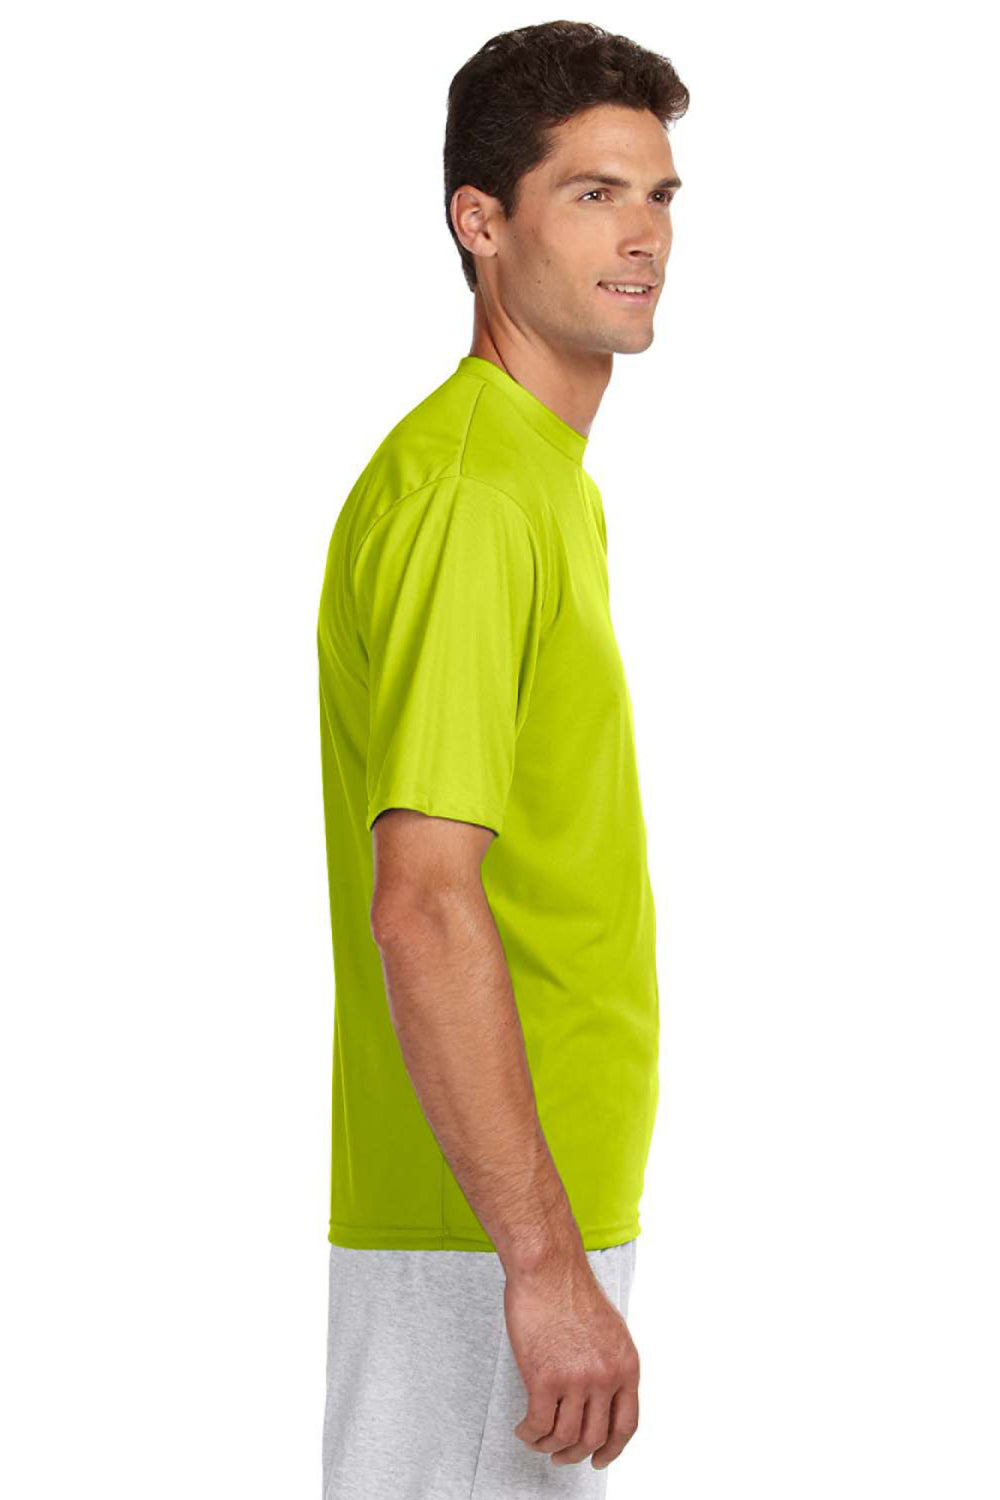 A4 N3142 Mens Performance Moisture Wicking Short Sleeve Crewneck T-Shirt Safety Yellow Model Side